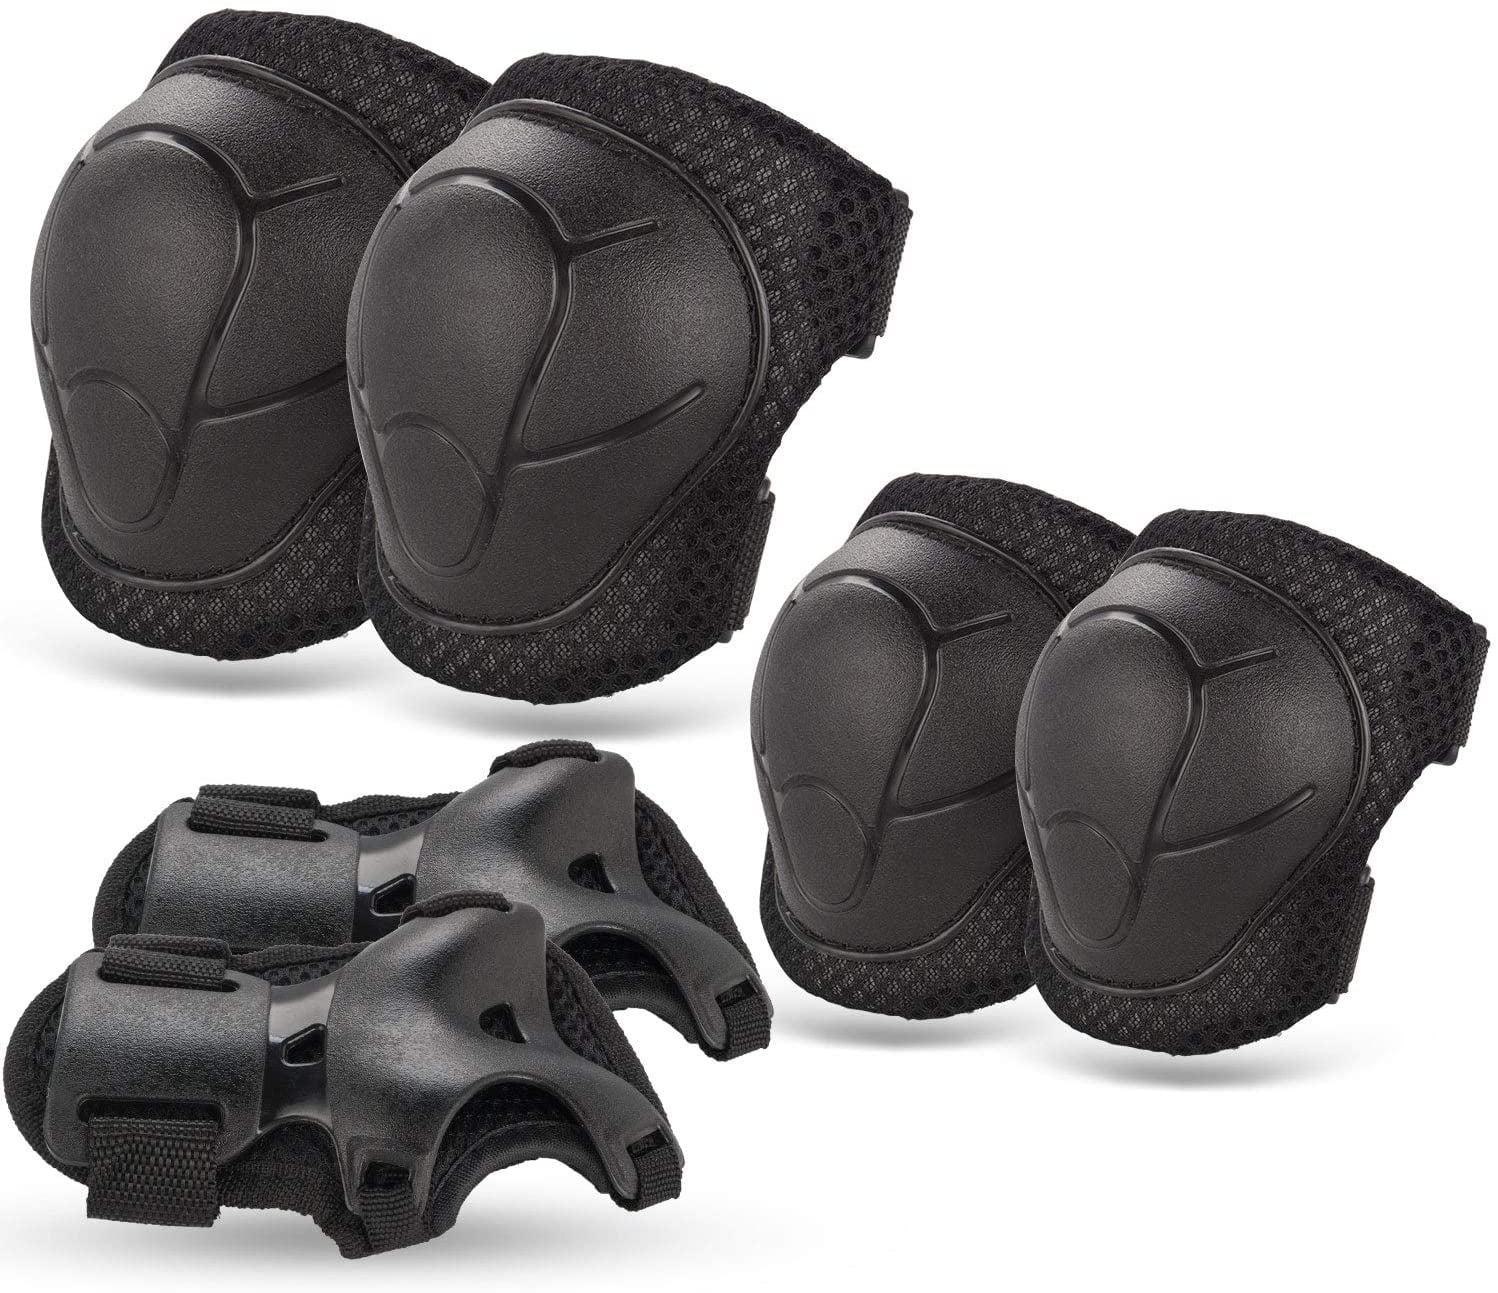 Bicycling Skating Roller Protective Pads Set for Kids Knee & Elbow Pad Black 